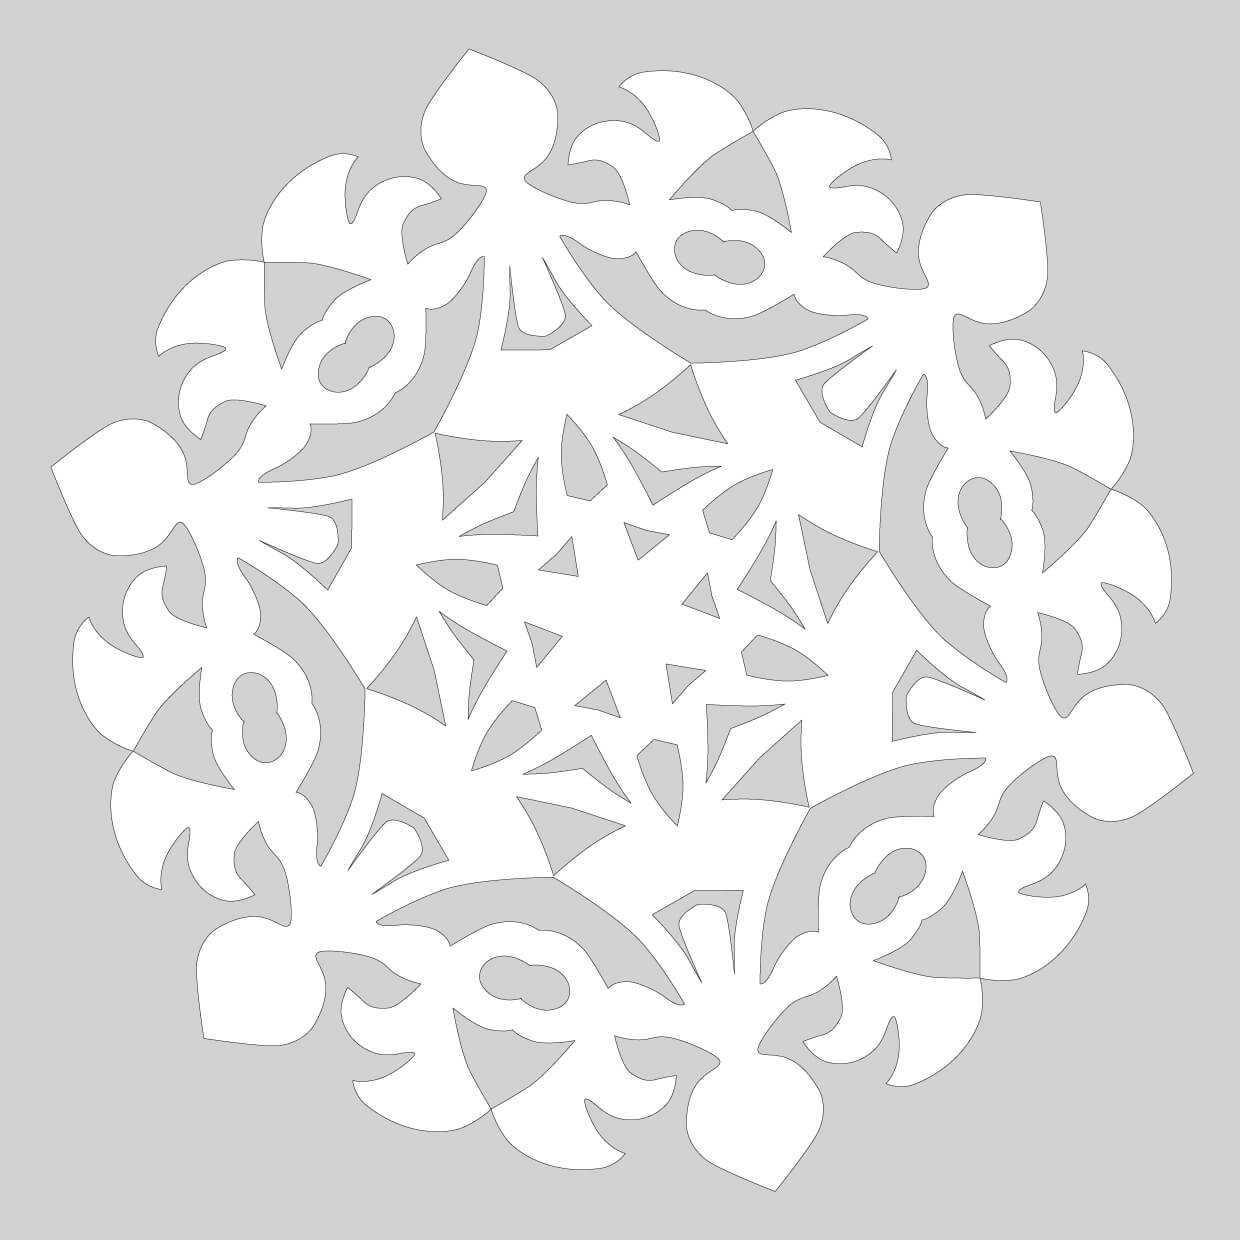 Blank Template To Draw A Pattern For Paper Snowflake | Free Intended For Blank Snowflake Template